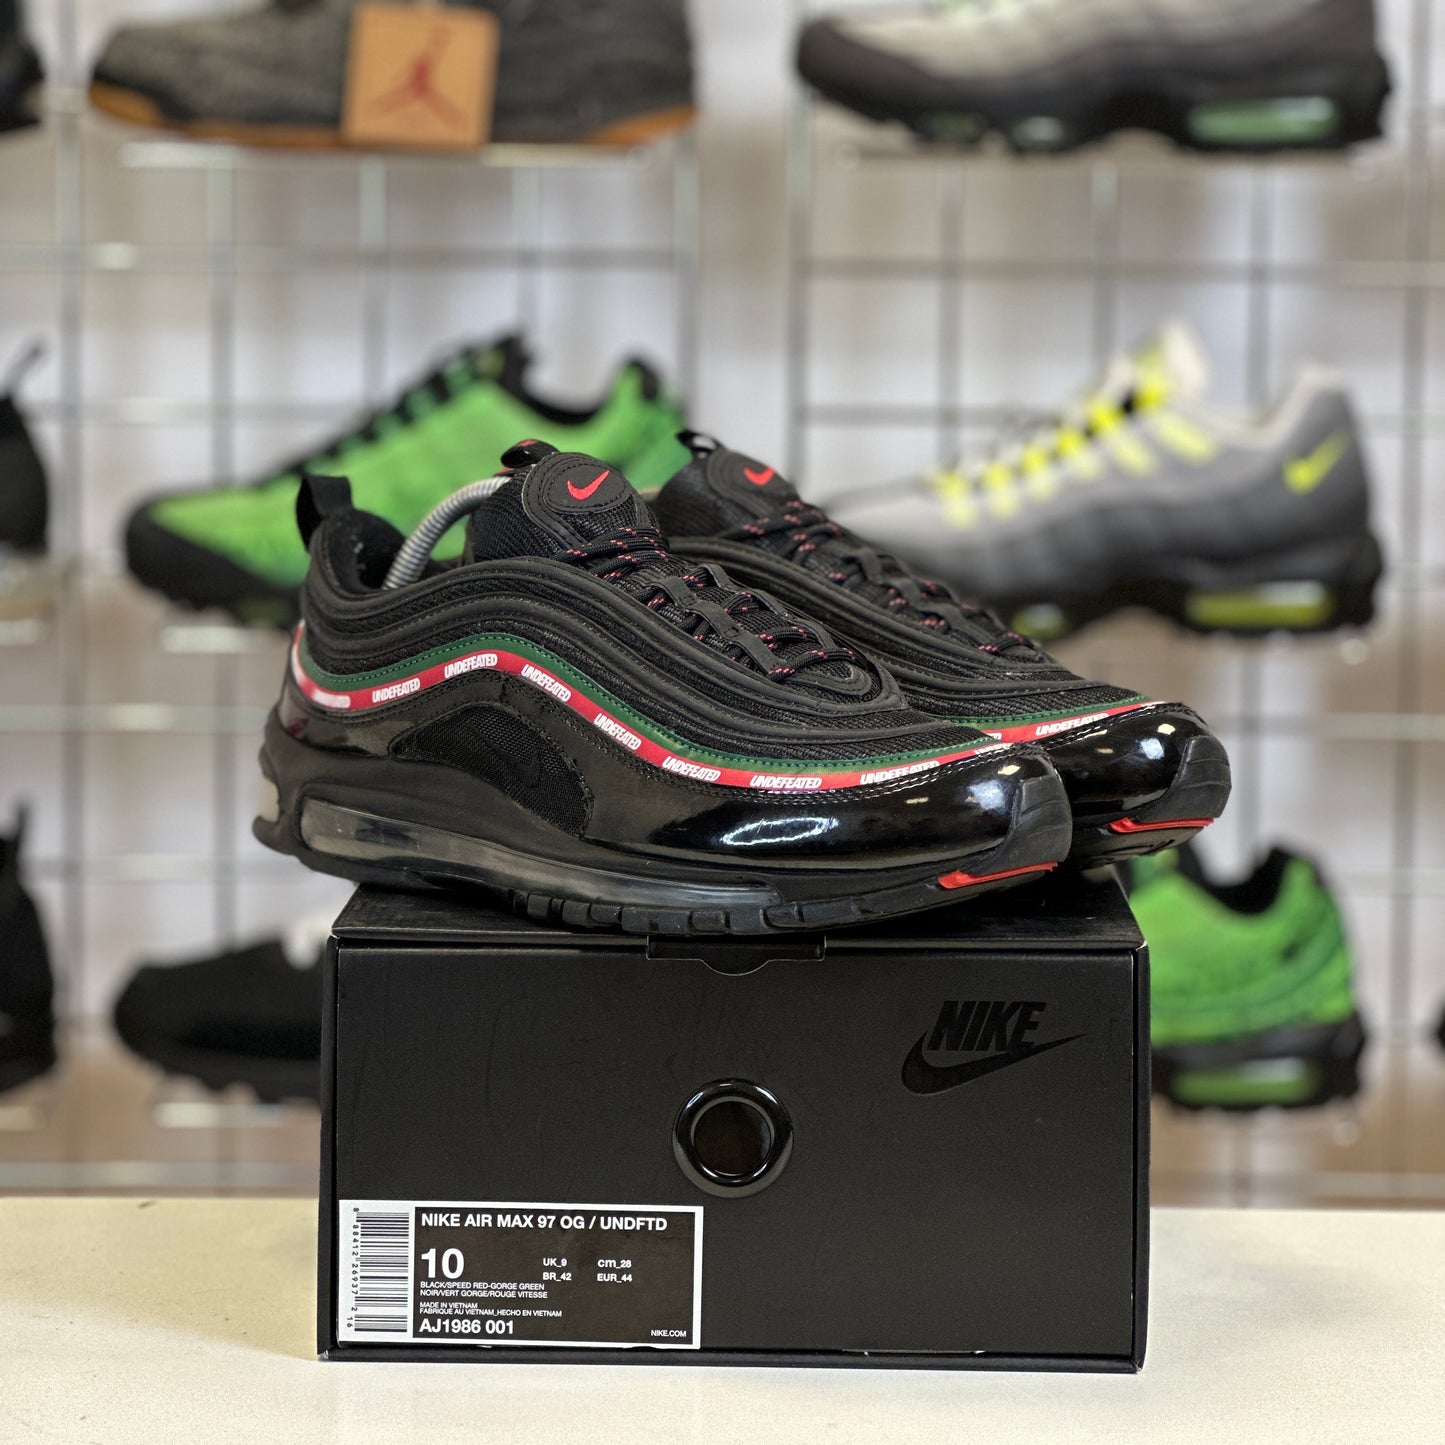 Nike Air Max 97 'Undefeated Black' UK9*